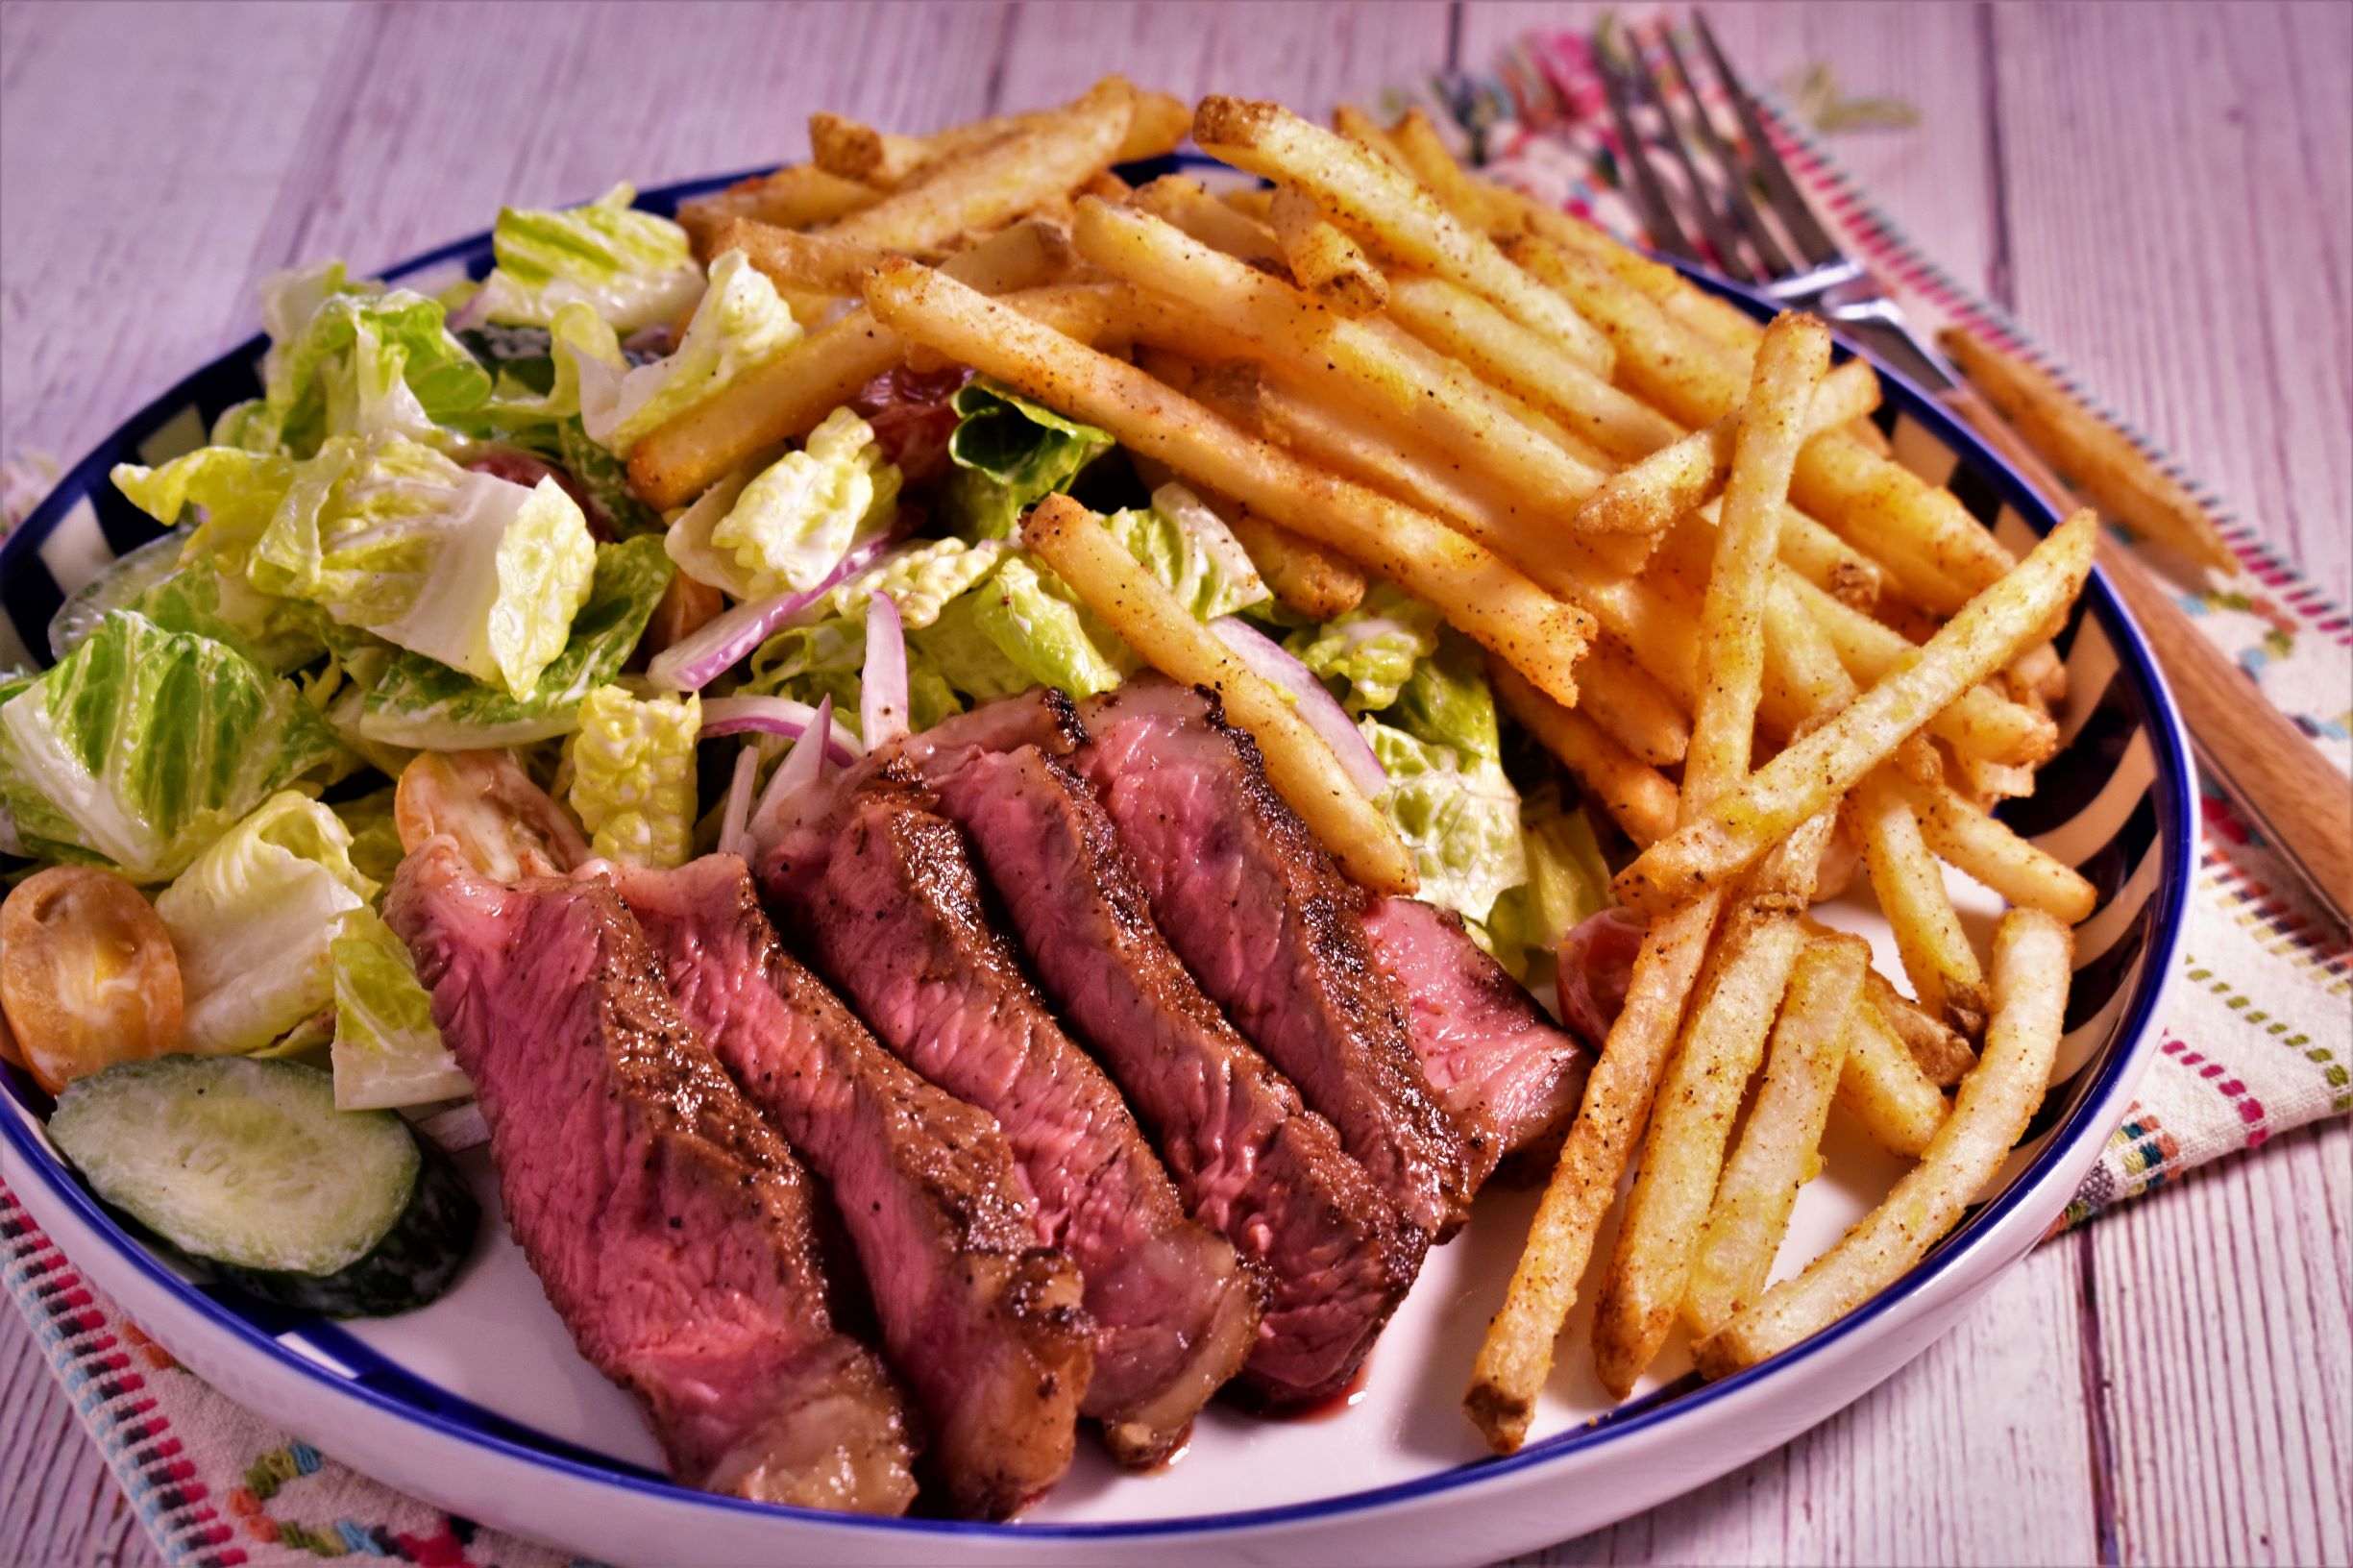 a pittsburgh steak salad with 6 pieces of steak cooked medium well and a side of seasoned fries